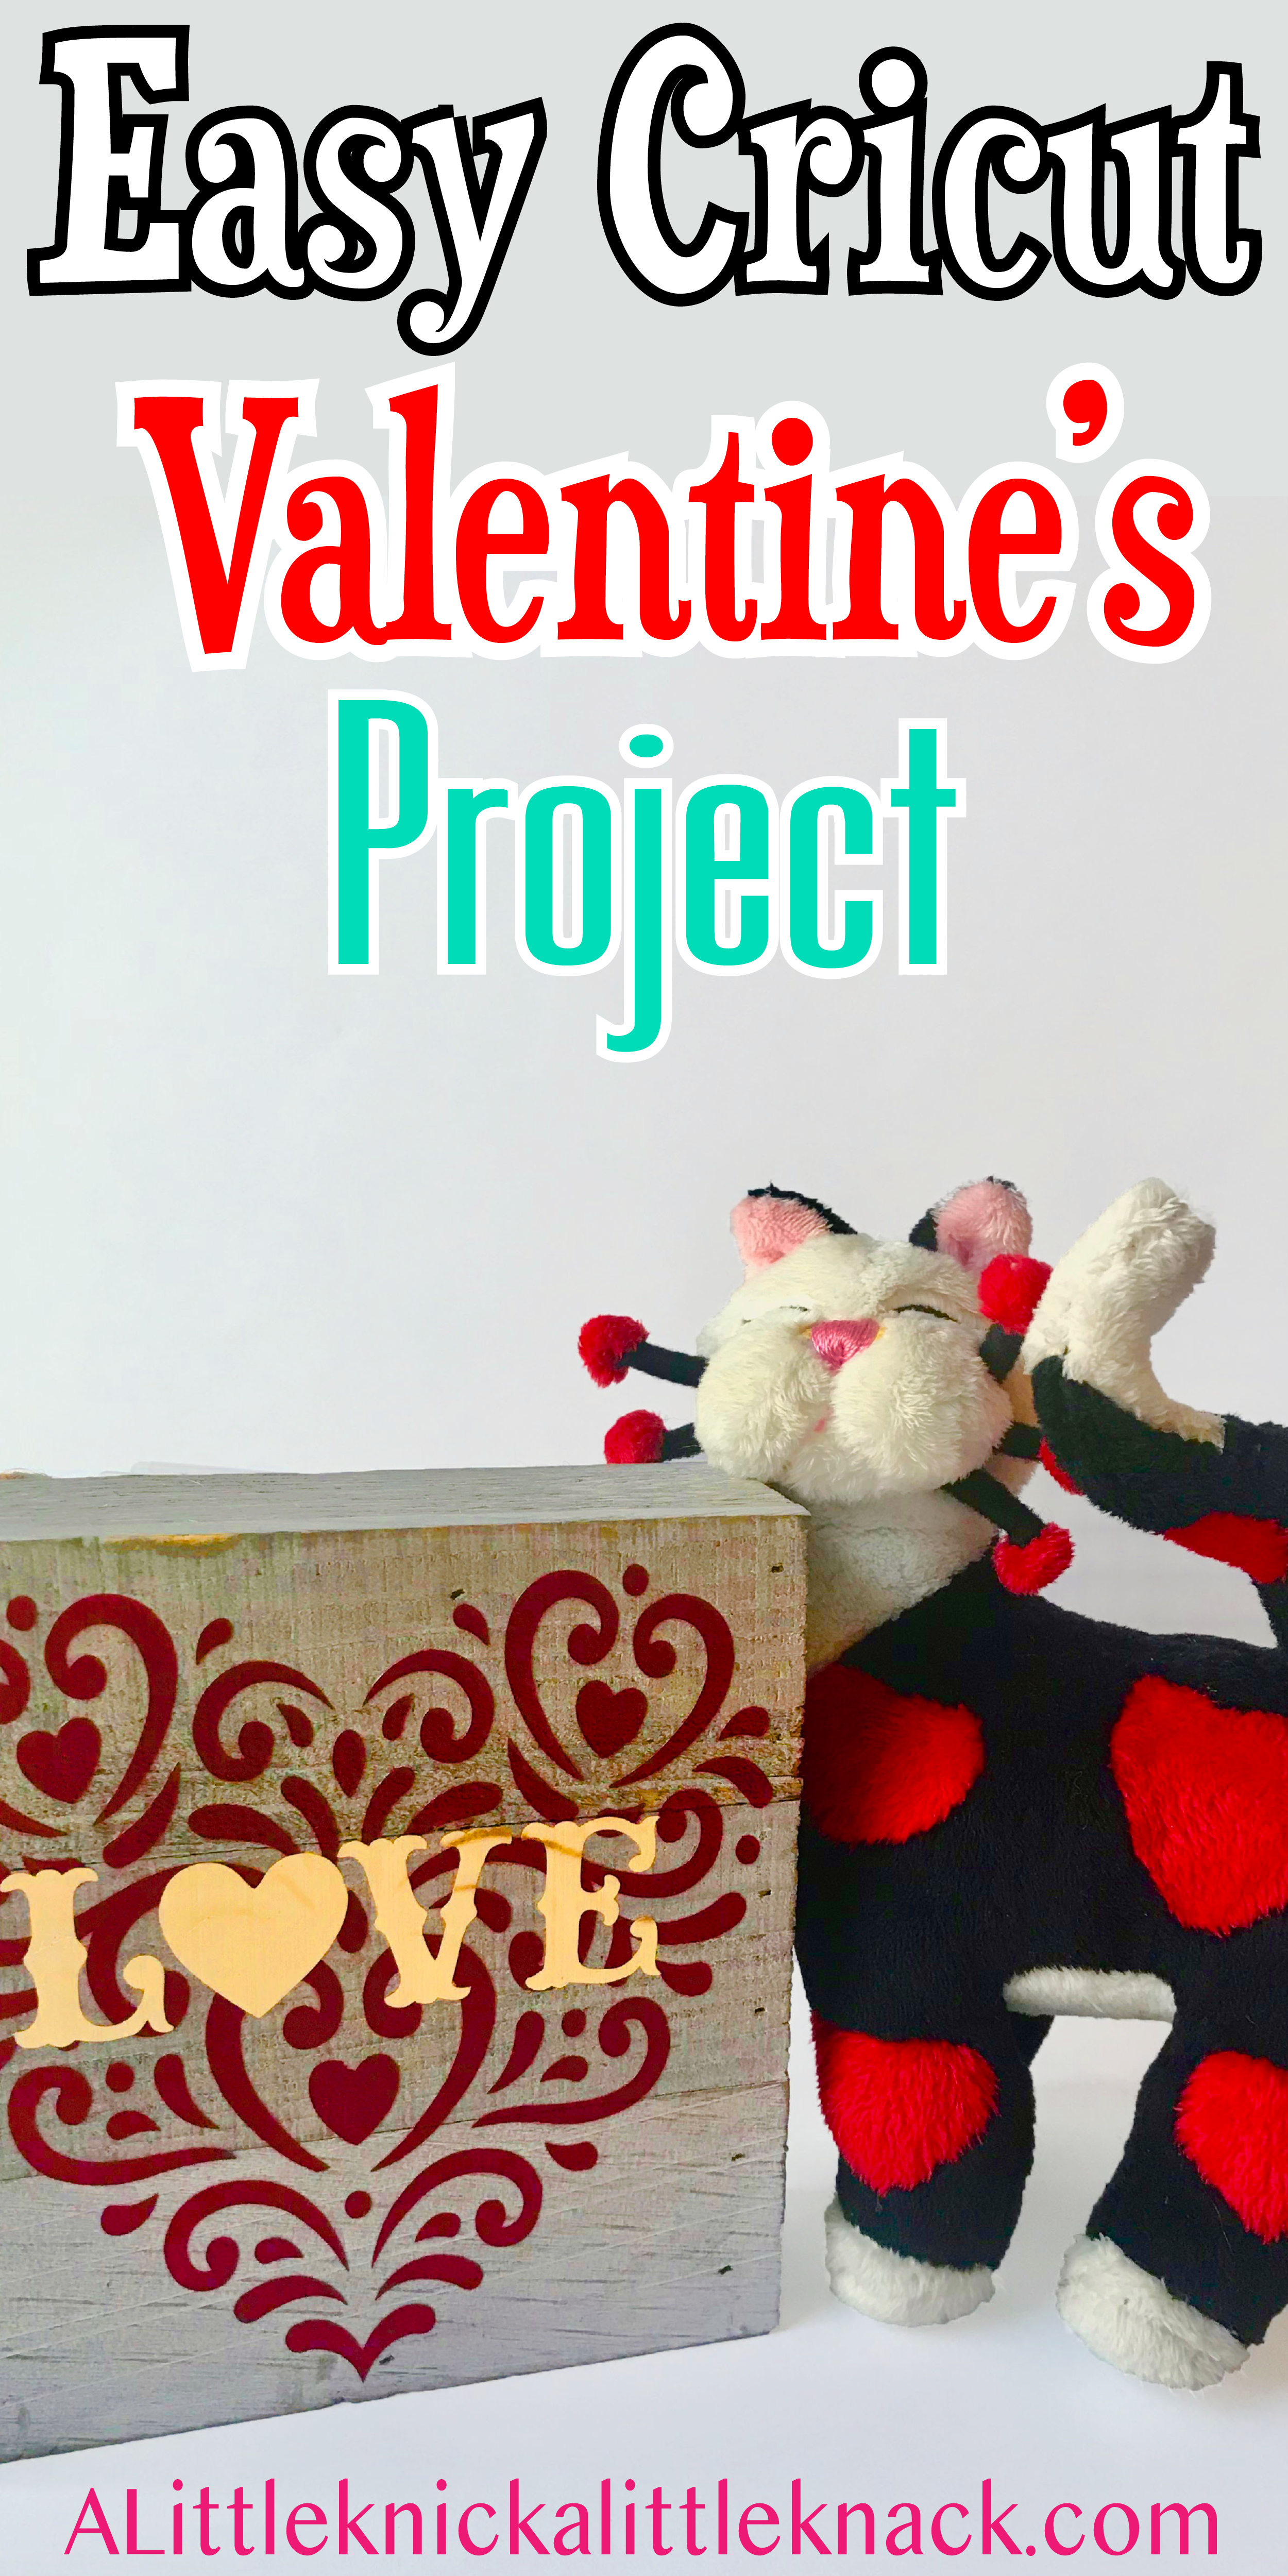 A step by step Cricut Valentine’s decor tutorial! Including tips on using vinyl stencils on unfinished wood #cricutprojects